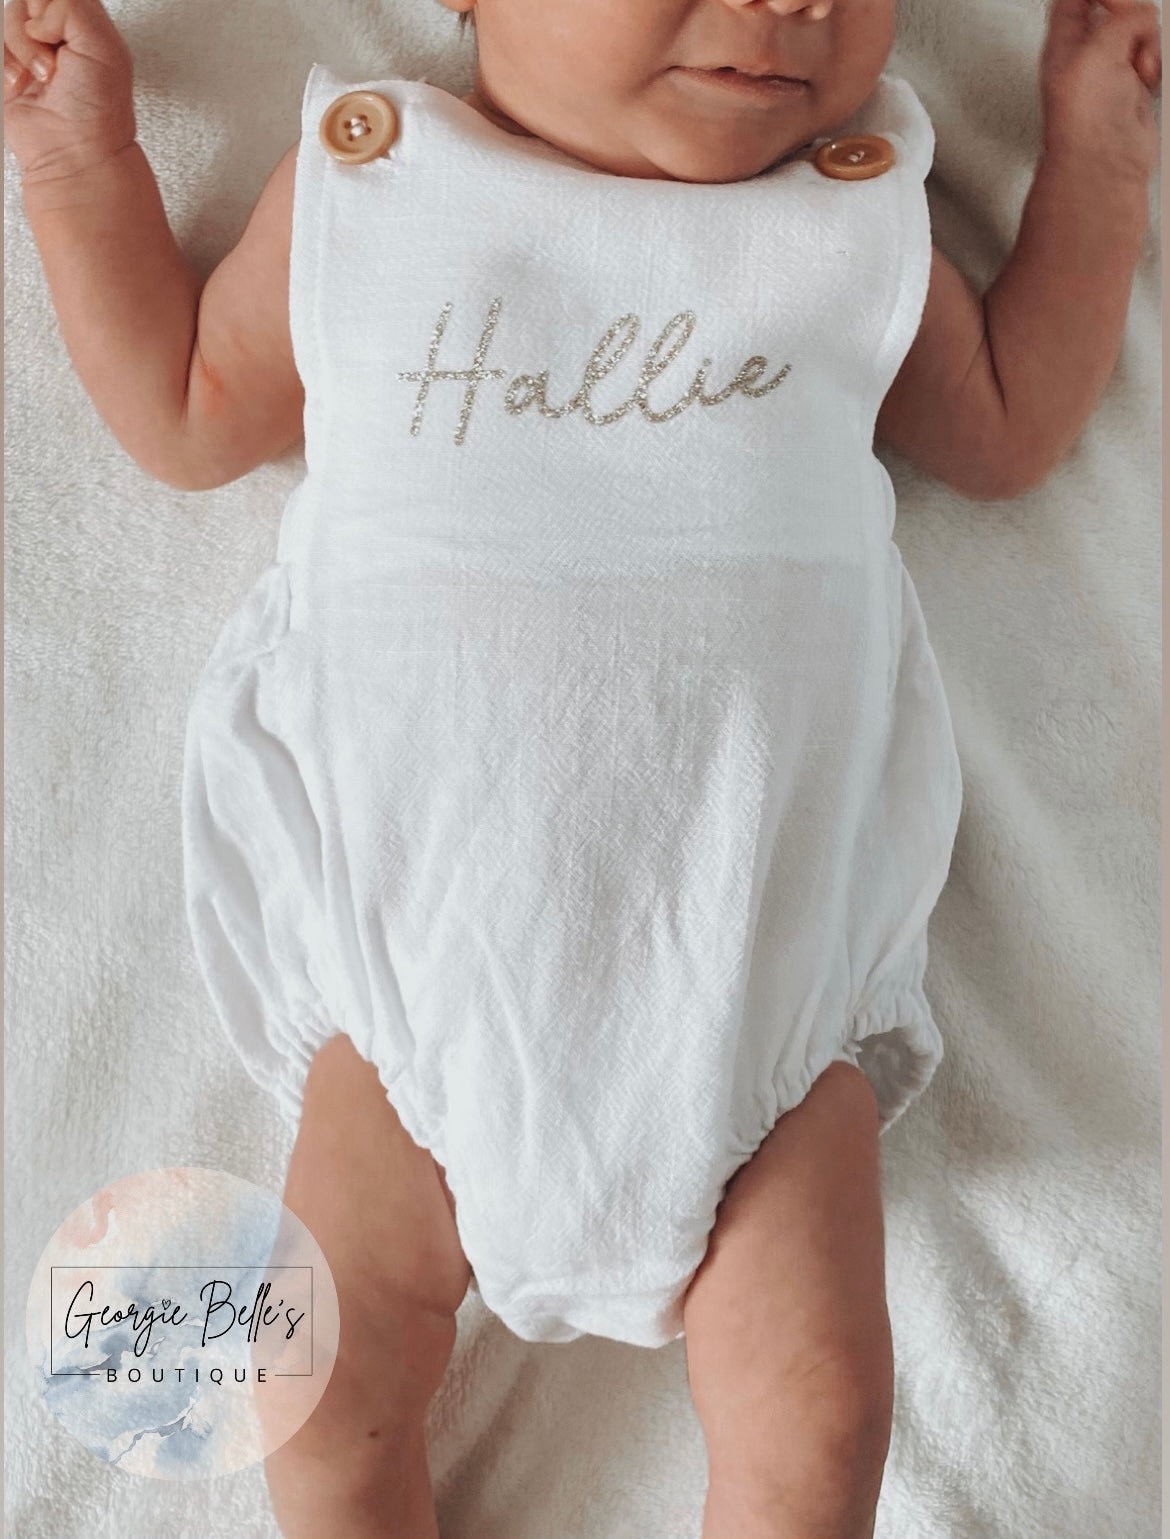 Personalised Baby Cotton Linen Romper